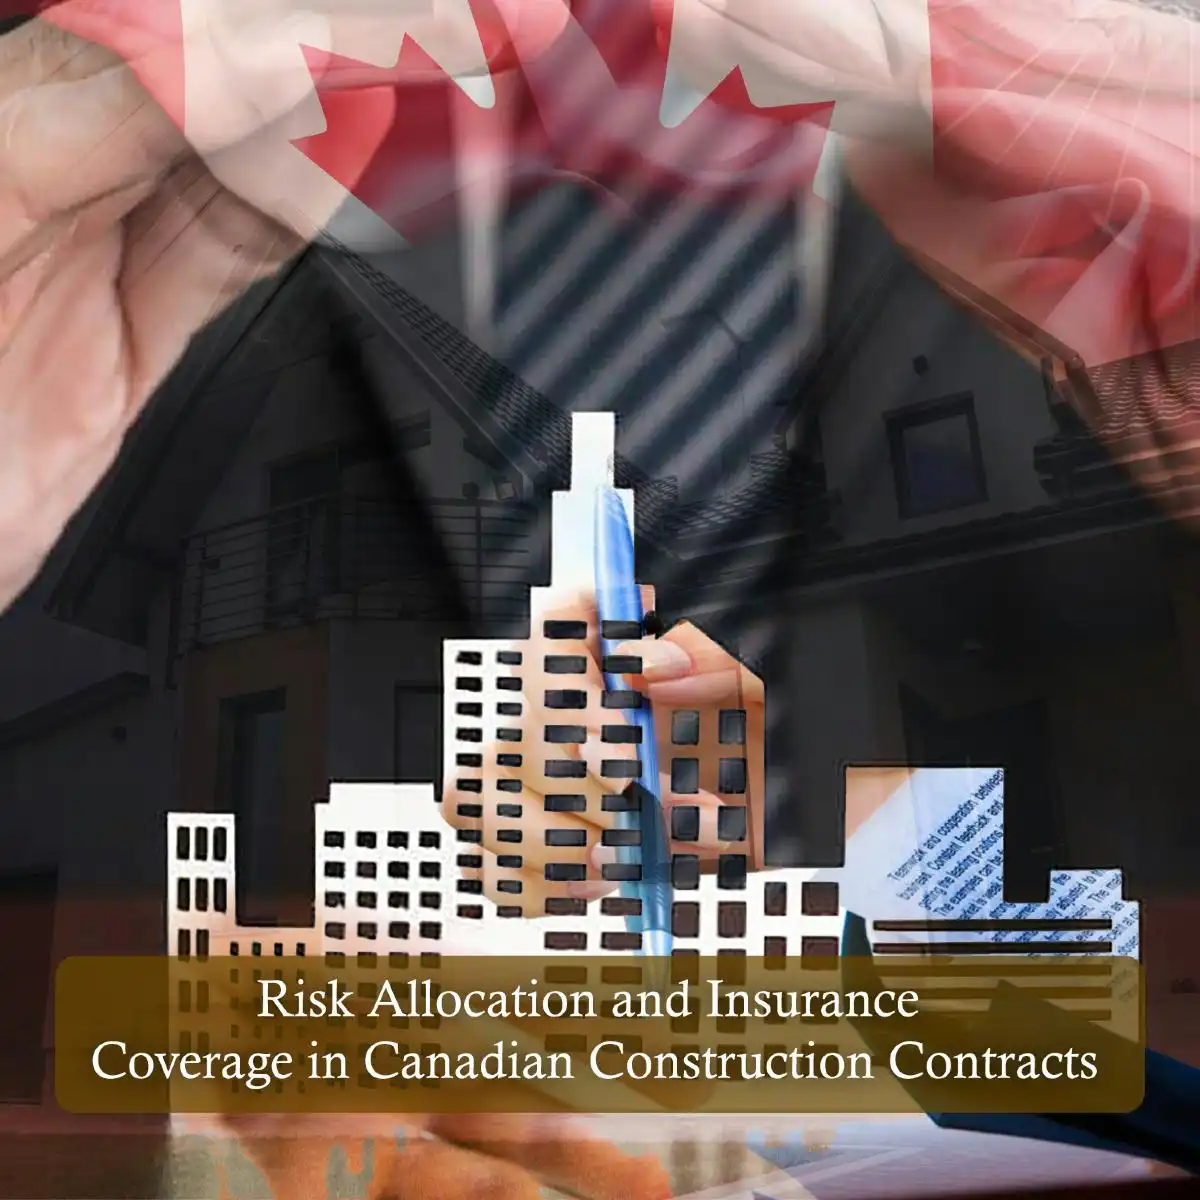 Risk Allocation and Insurance Coverage in Canadian Construction Contracts